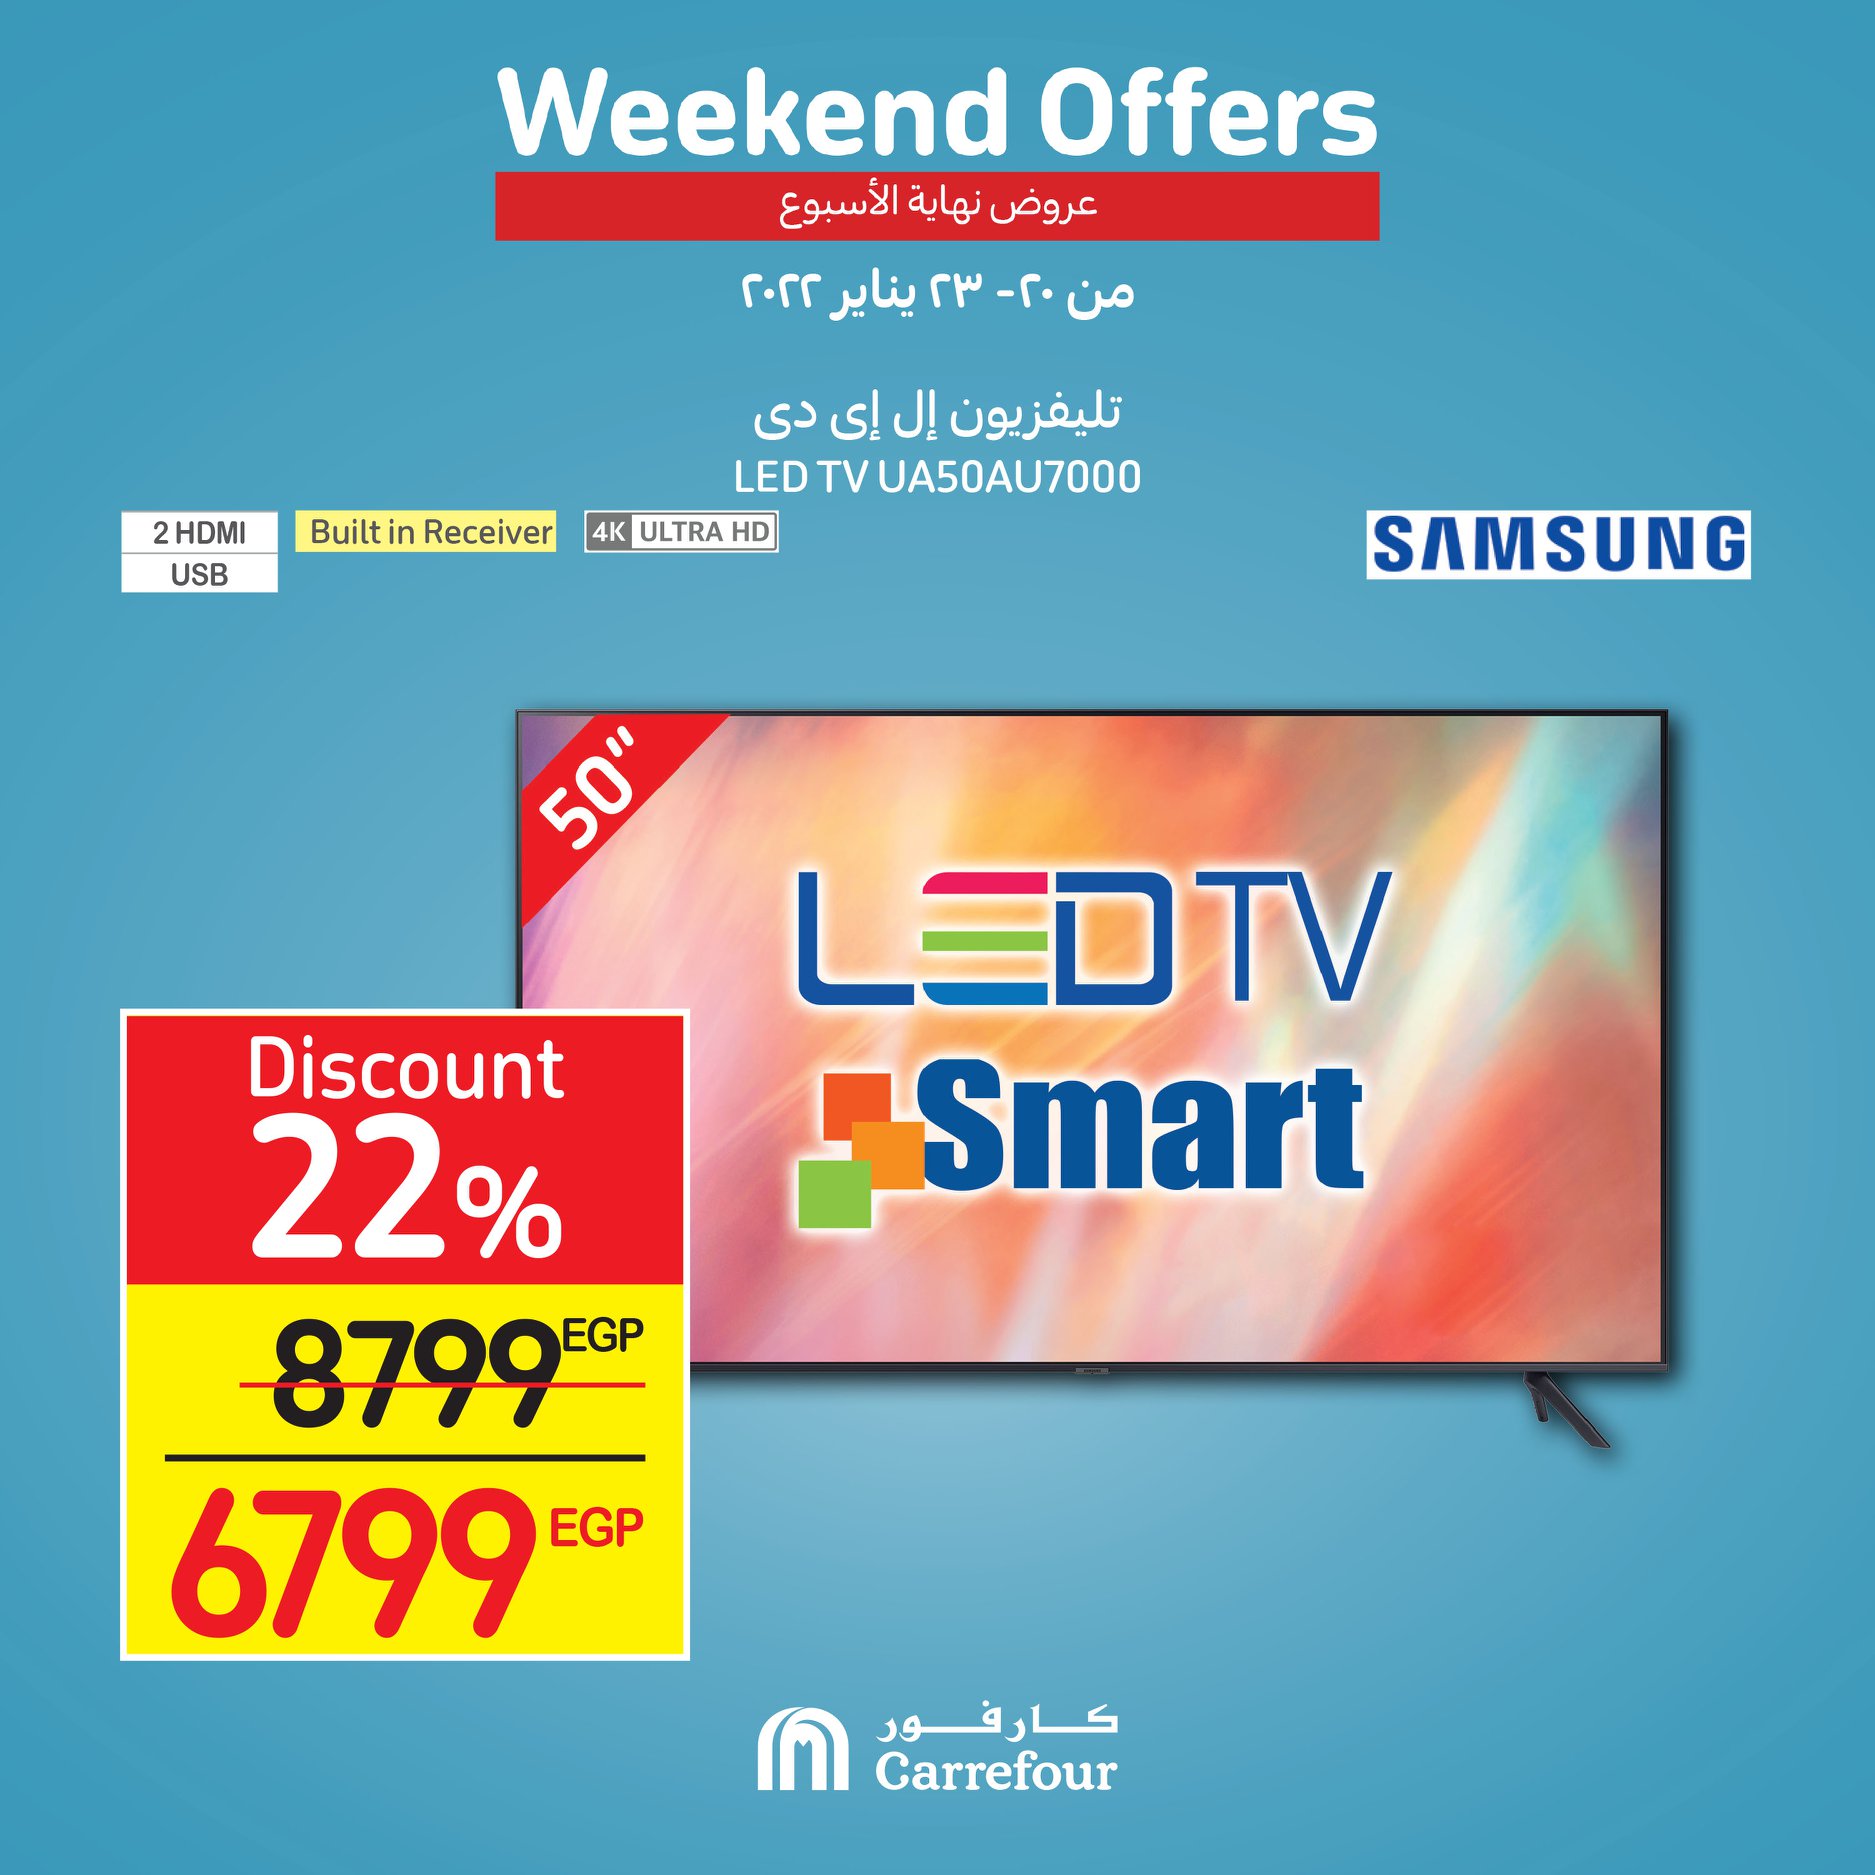 Watch Carrefour's gifts and surprises at Weekend and dirt cheap prices 7